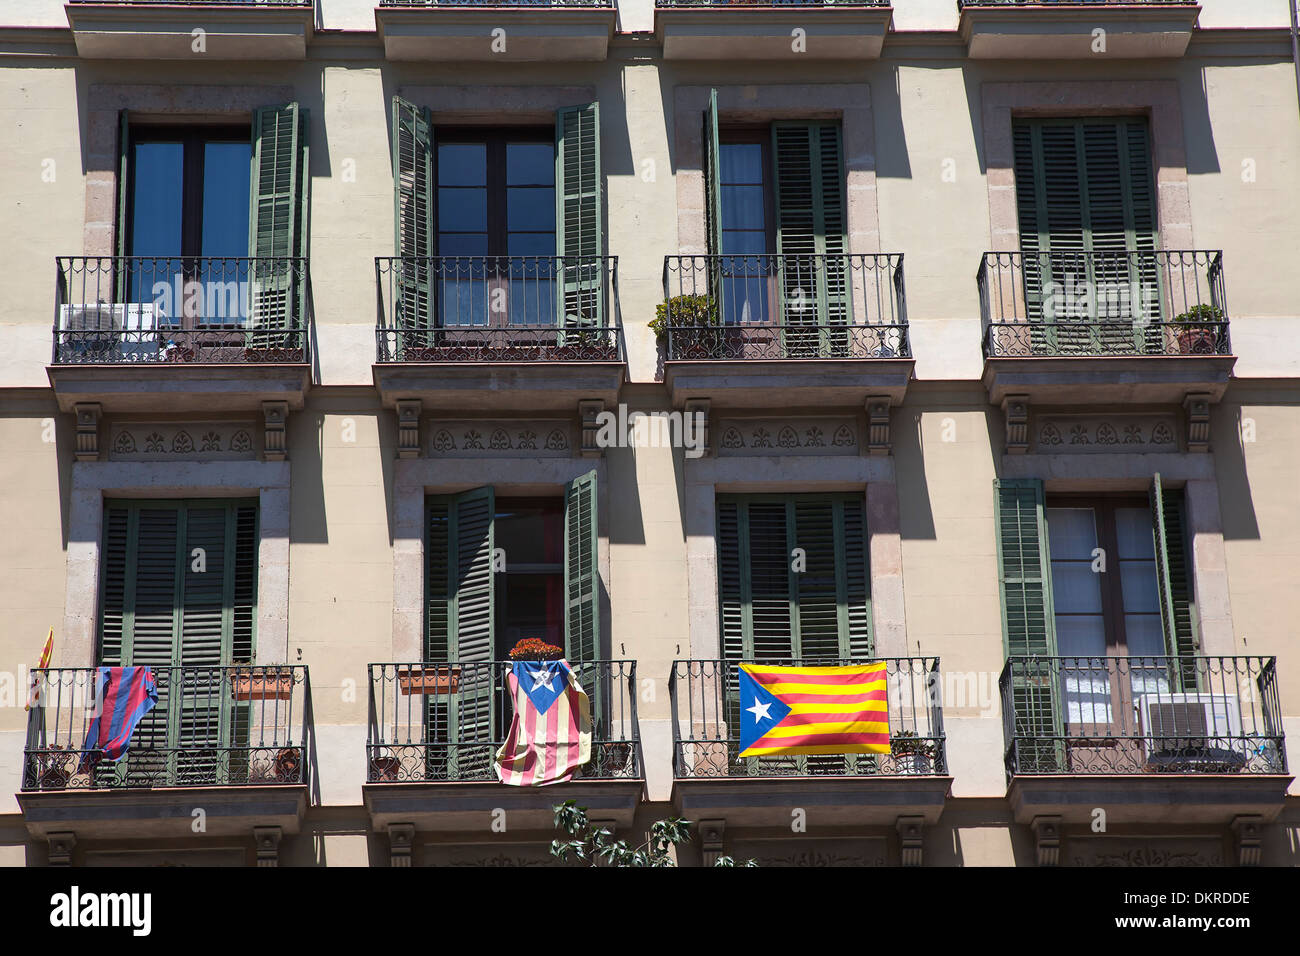 Spain, Catalonia, Barcelona, Eixample, Typical apartment building facade with balconies, flying Catalan independence flags. Stock Photo